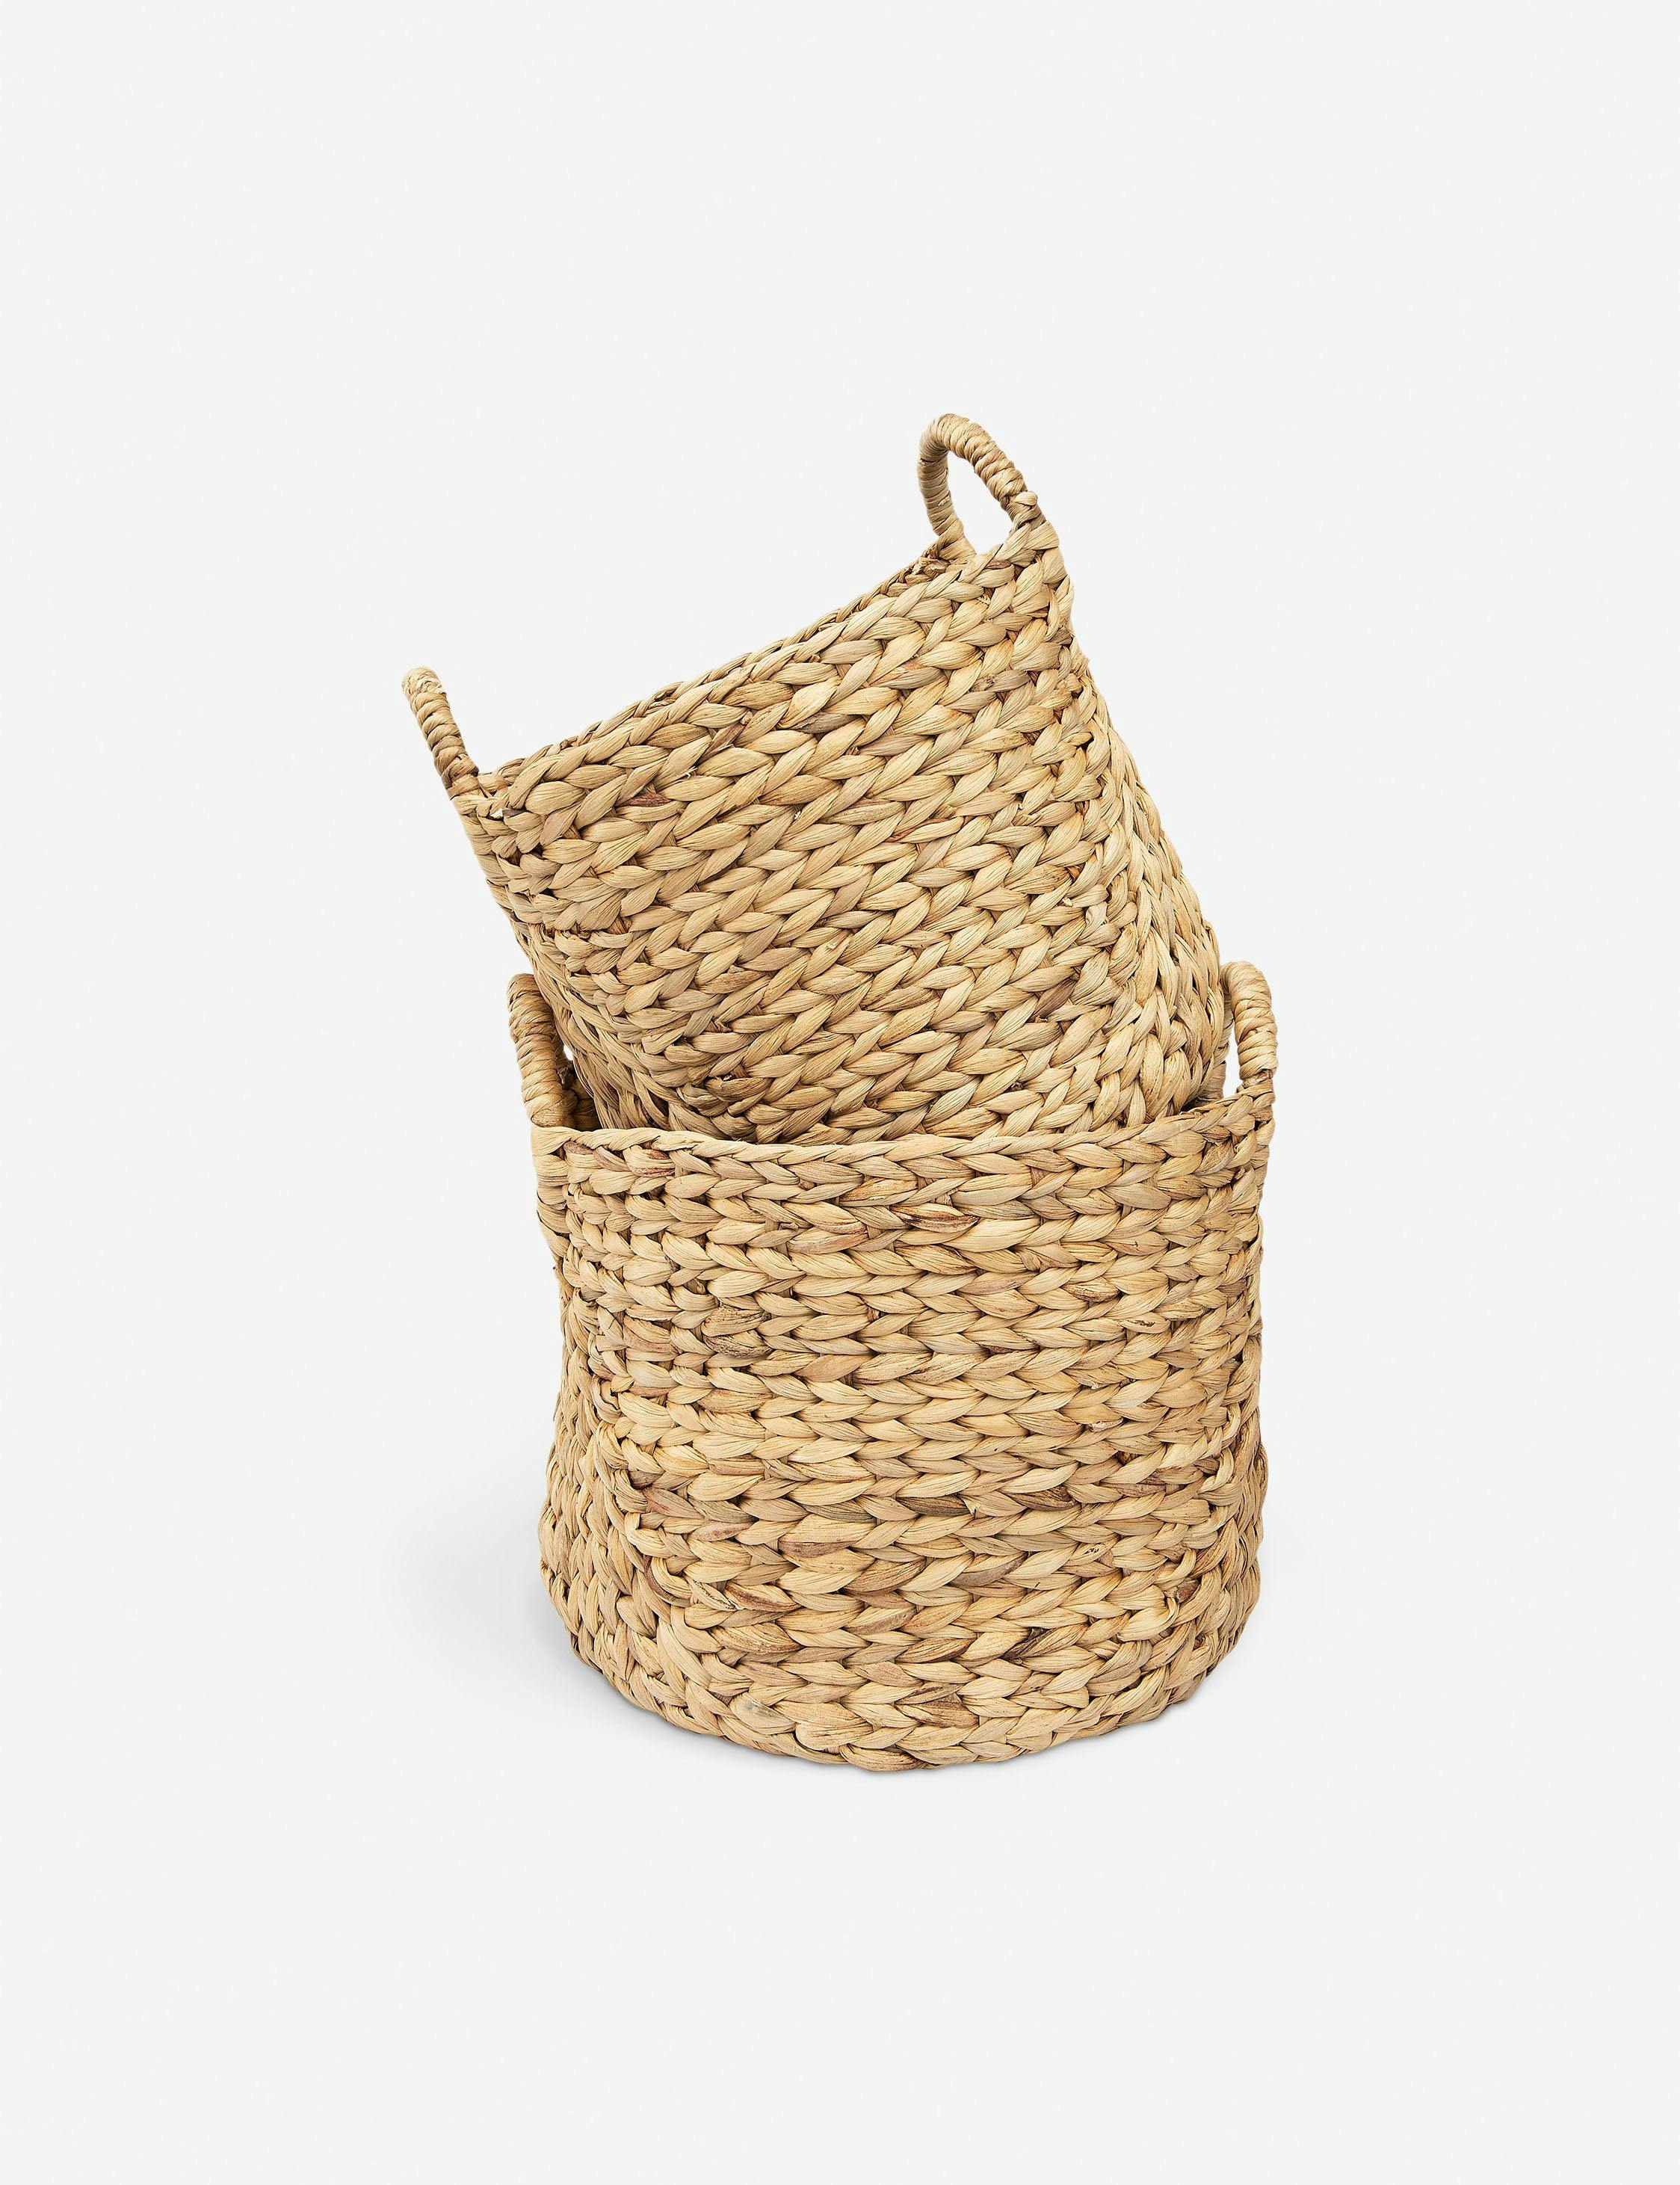 Handwoven Natural Seagrass Round Storage Baskets with Handles (Set of 2)